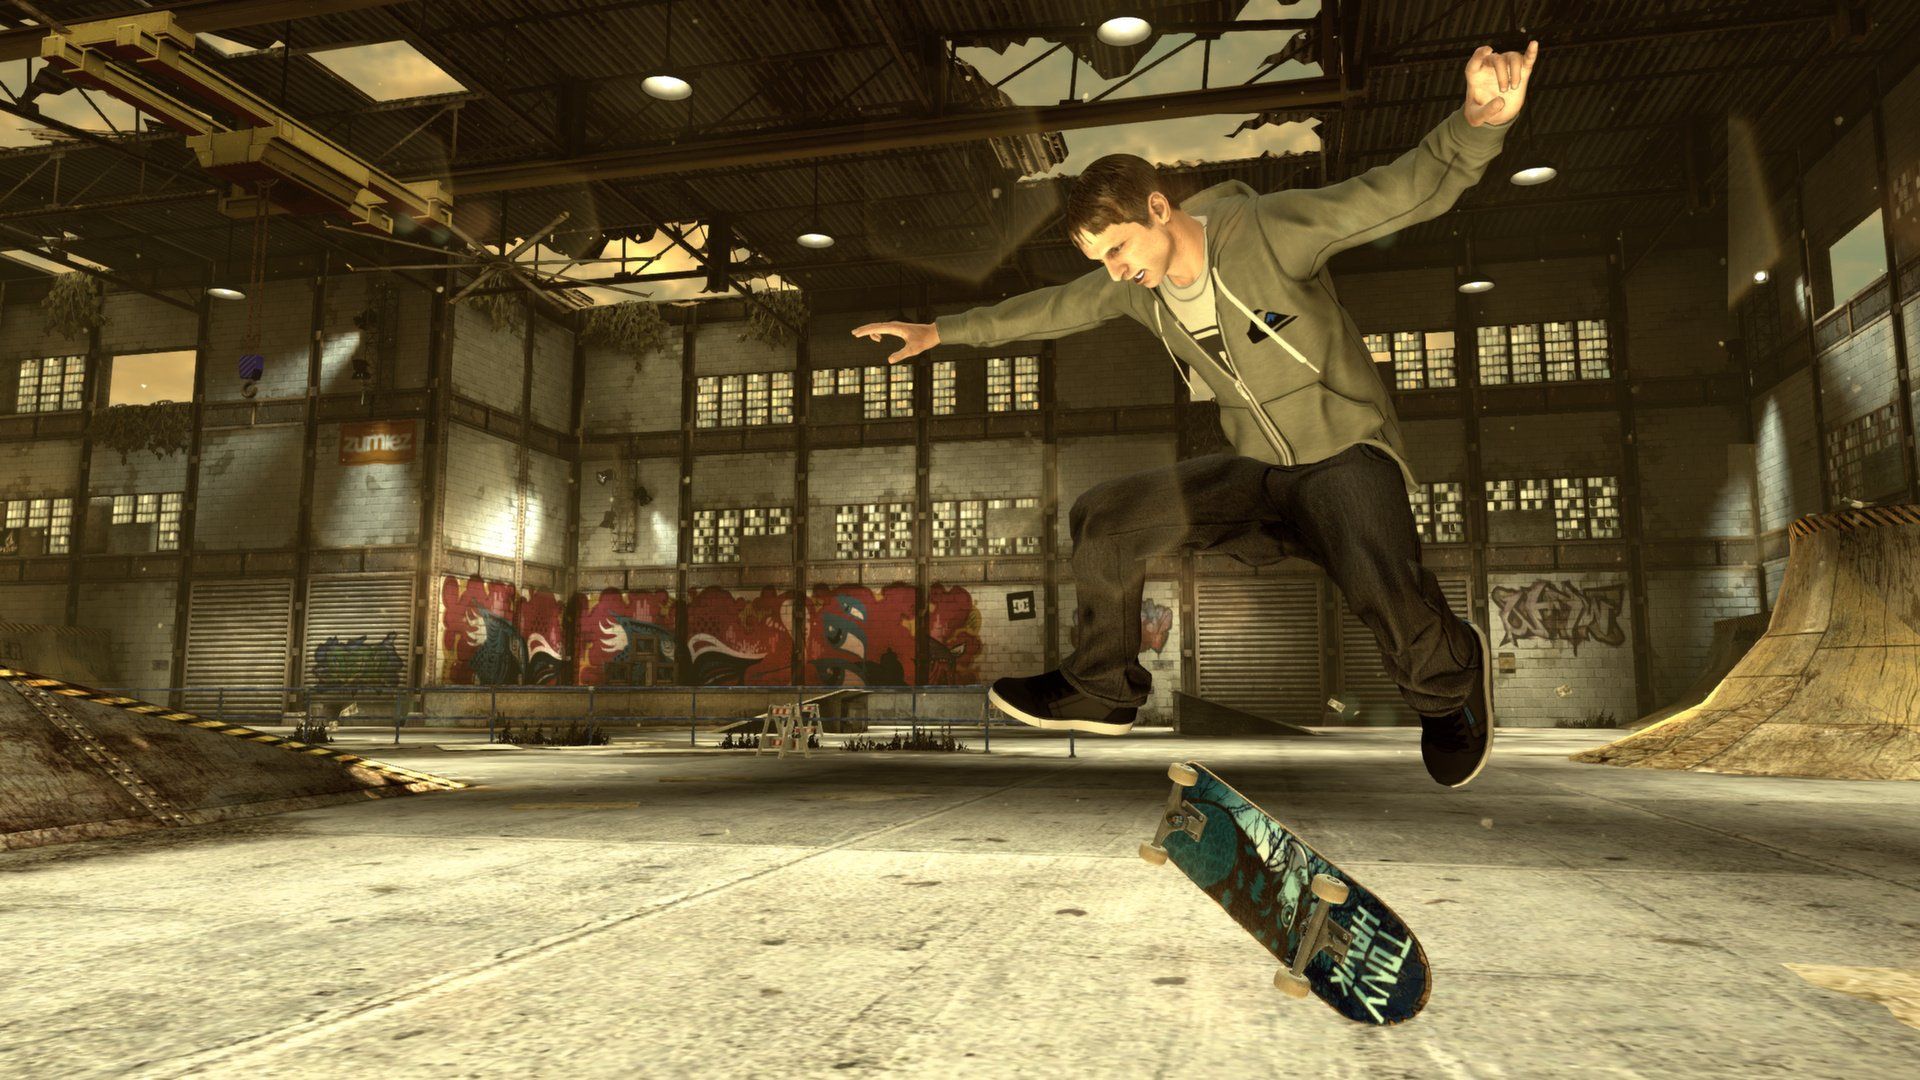 Rumour: Tony Hawk's Pro Skater Remakes Incoming, Says Infamous Insider